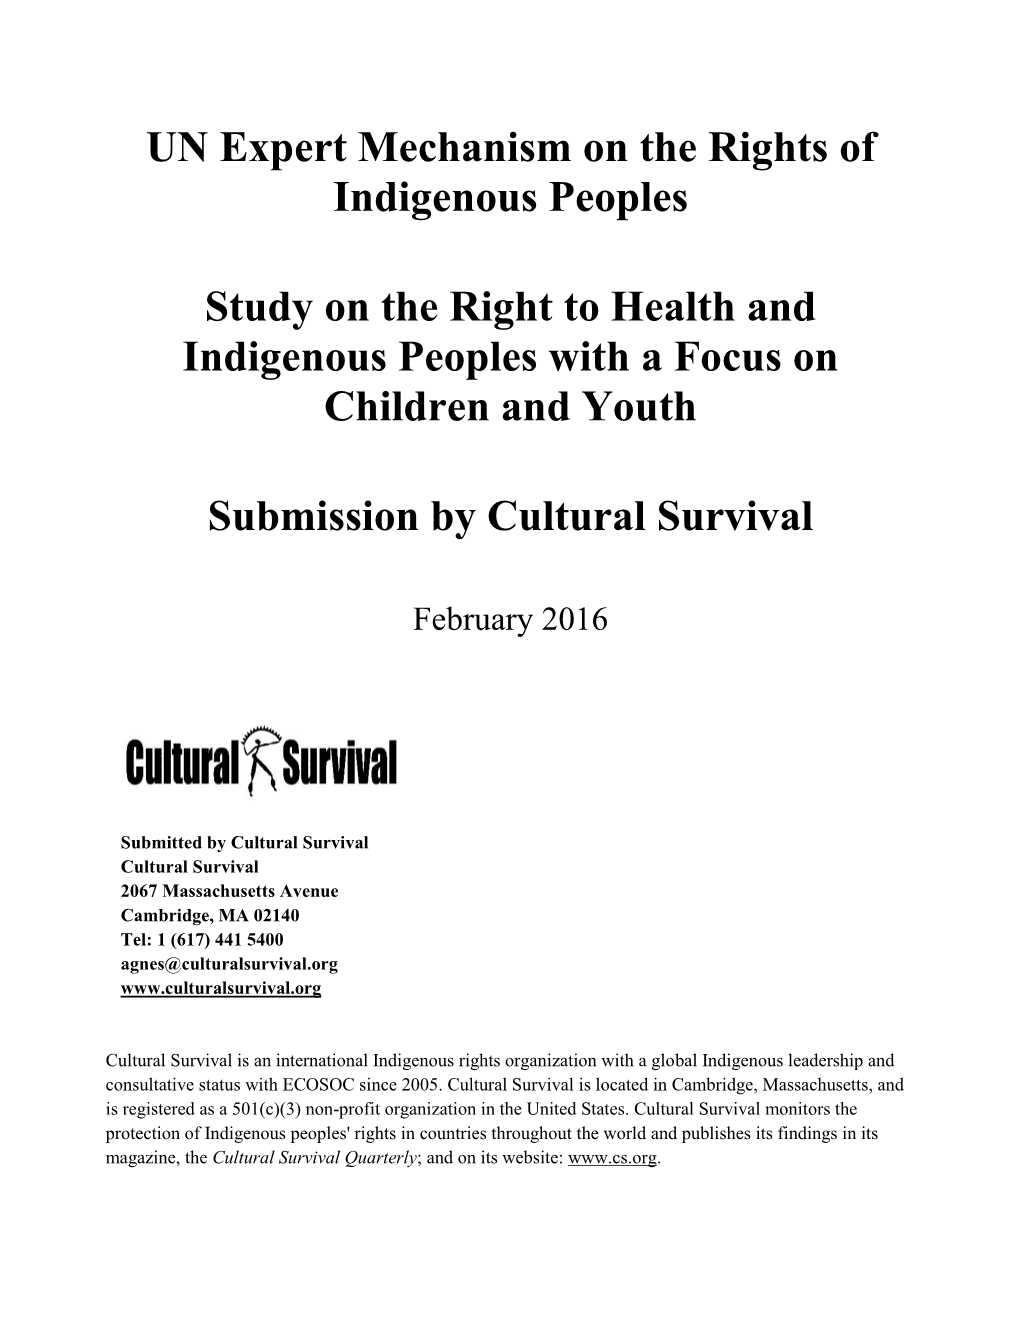 UN Expert Mechanism on the Rights of Indigenous Peoples Study on The